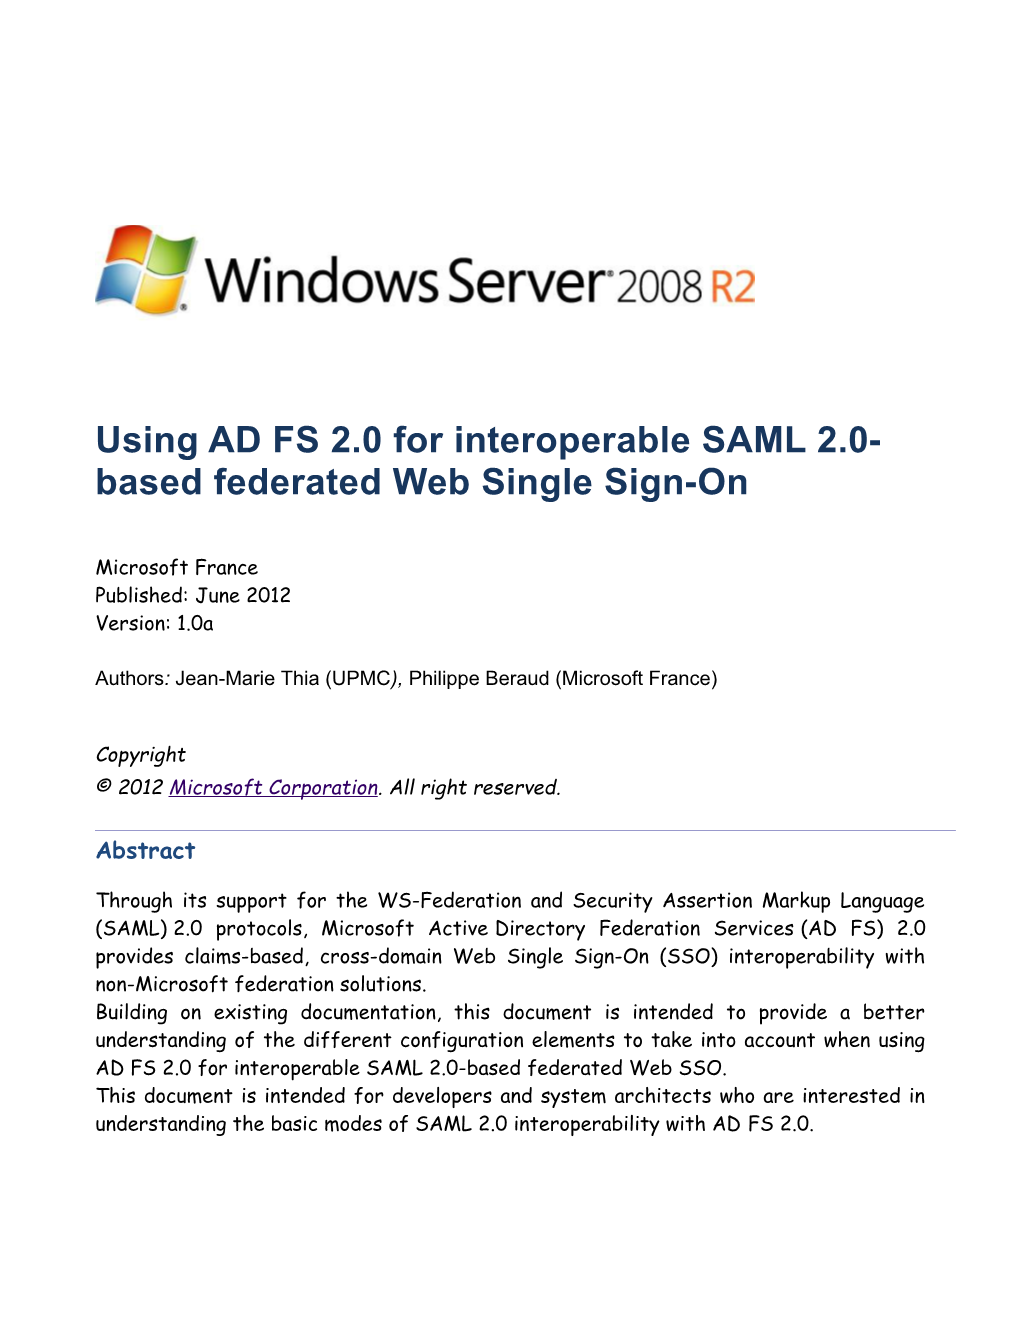 Using AD FS 2.0 for Interoperable SAML 2.0-Based Federated Web Single Sign-On